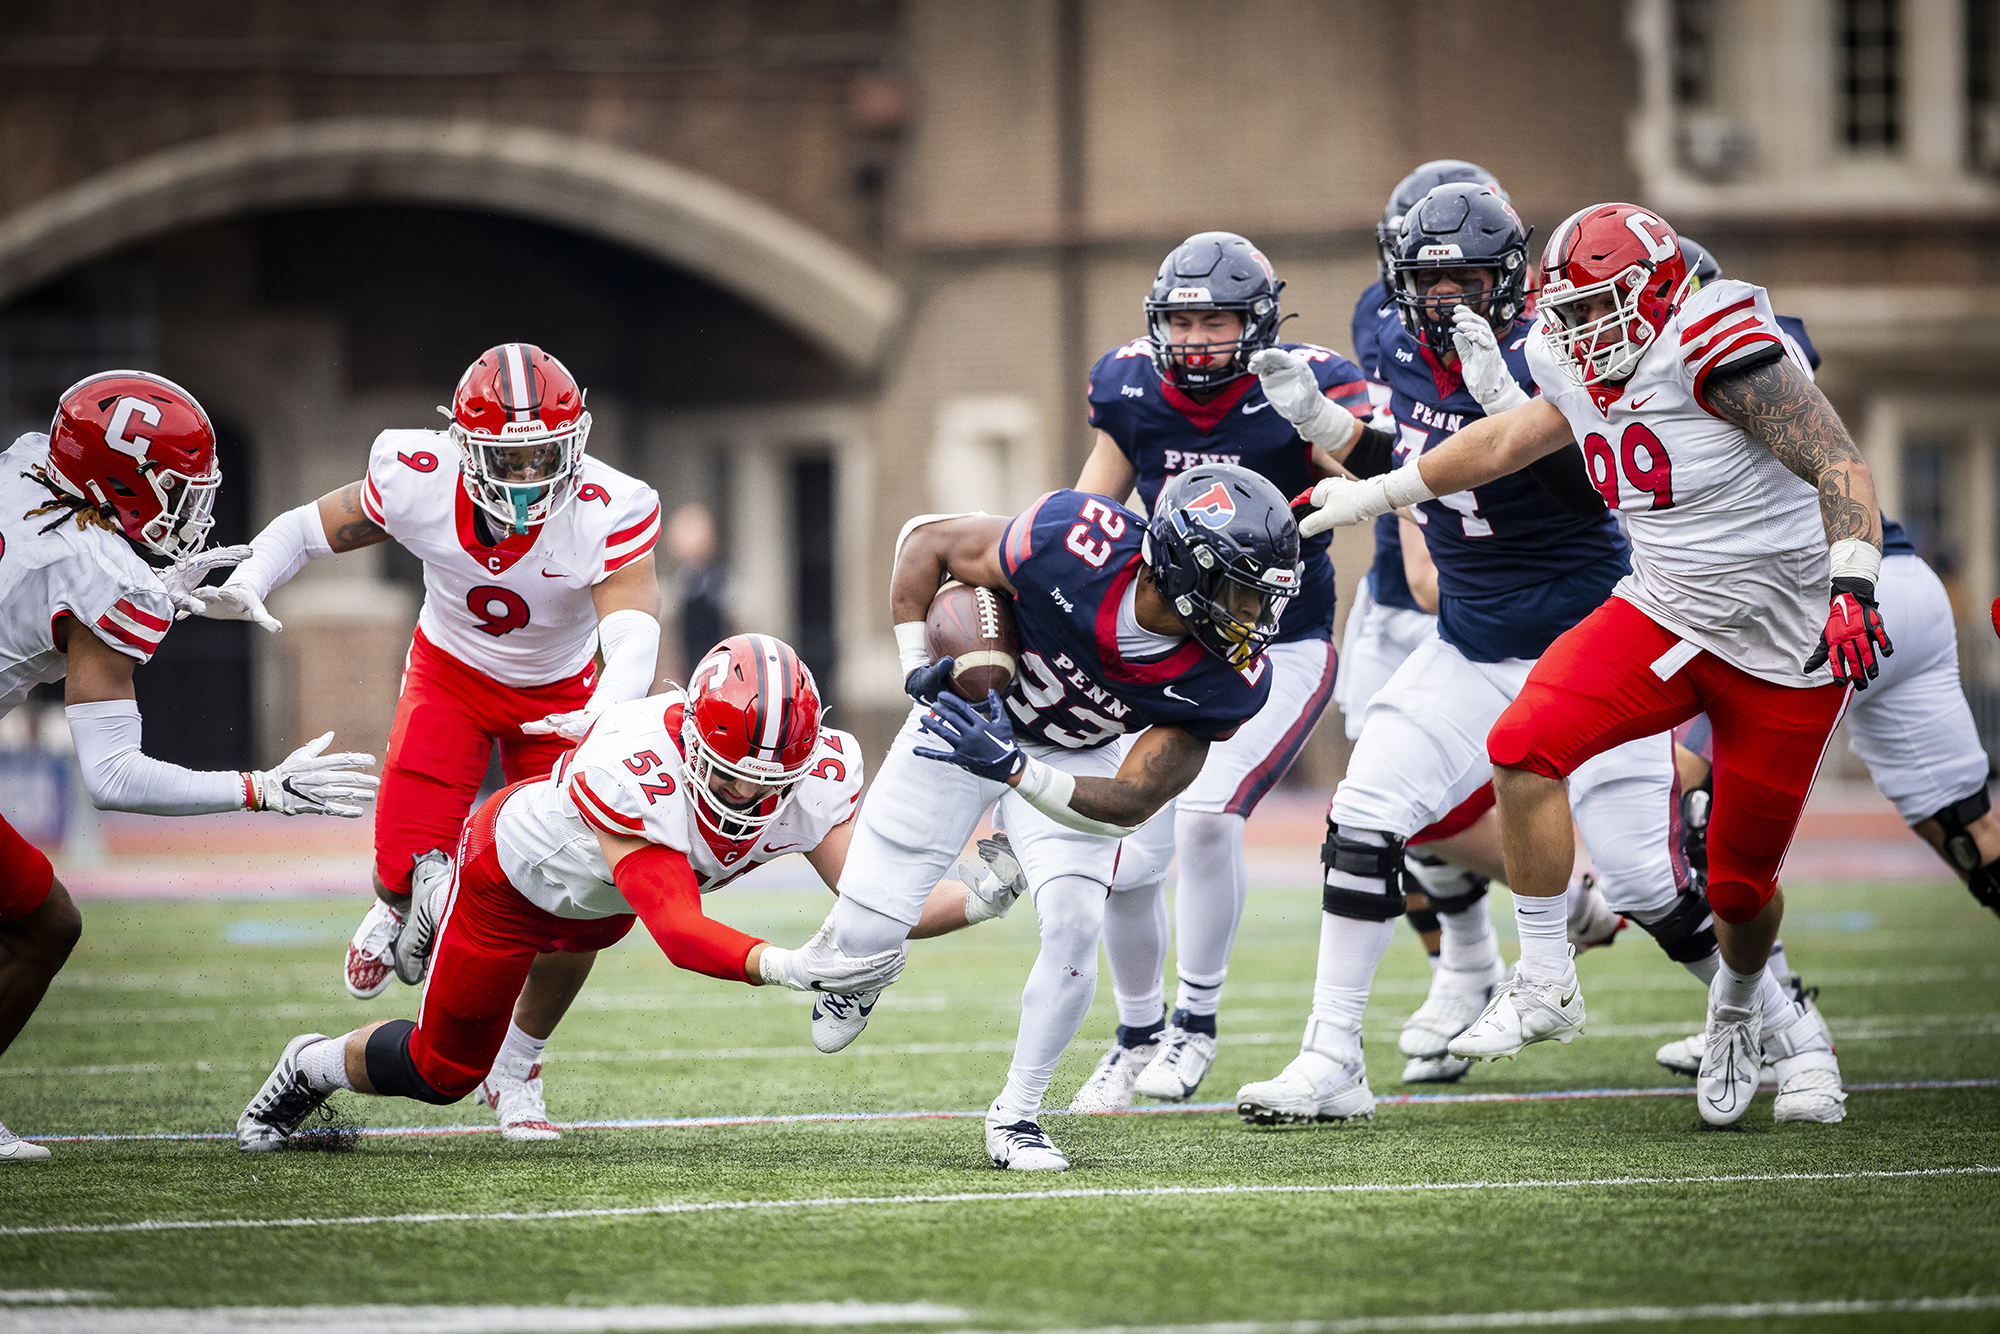 penn quakers play during homecoming weekend against cornell